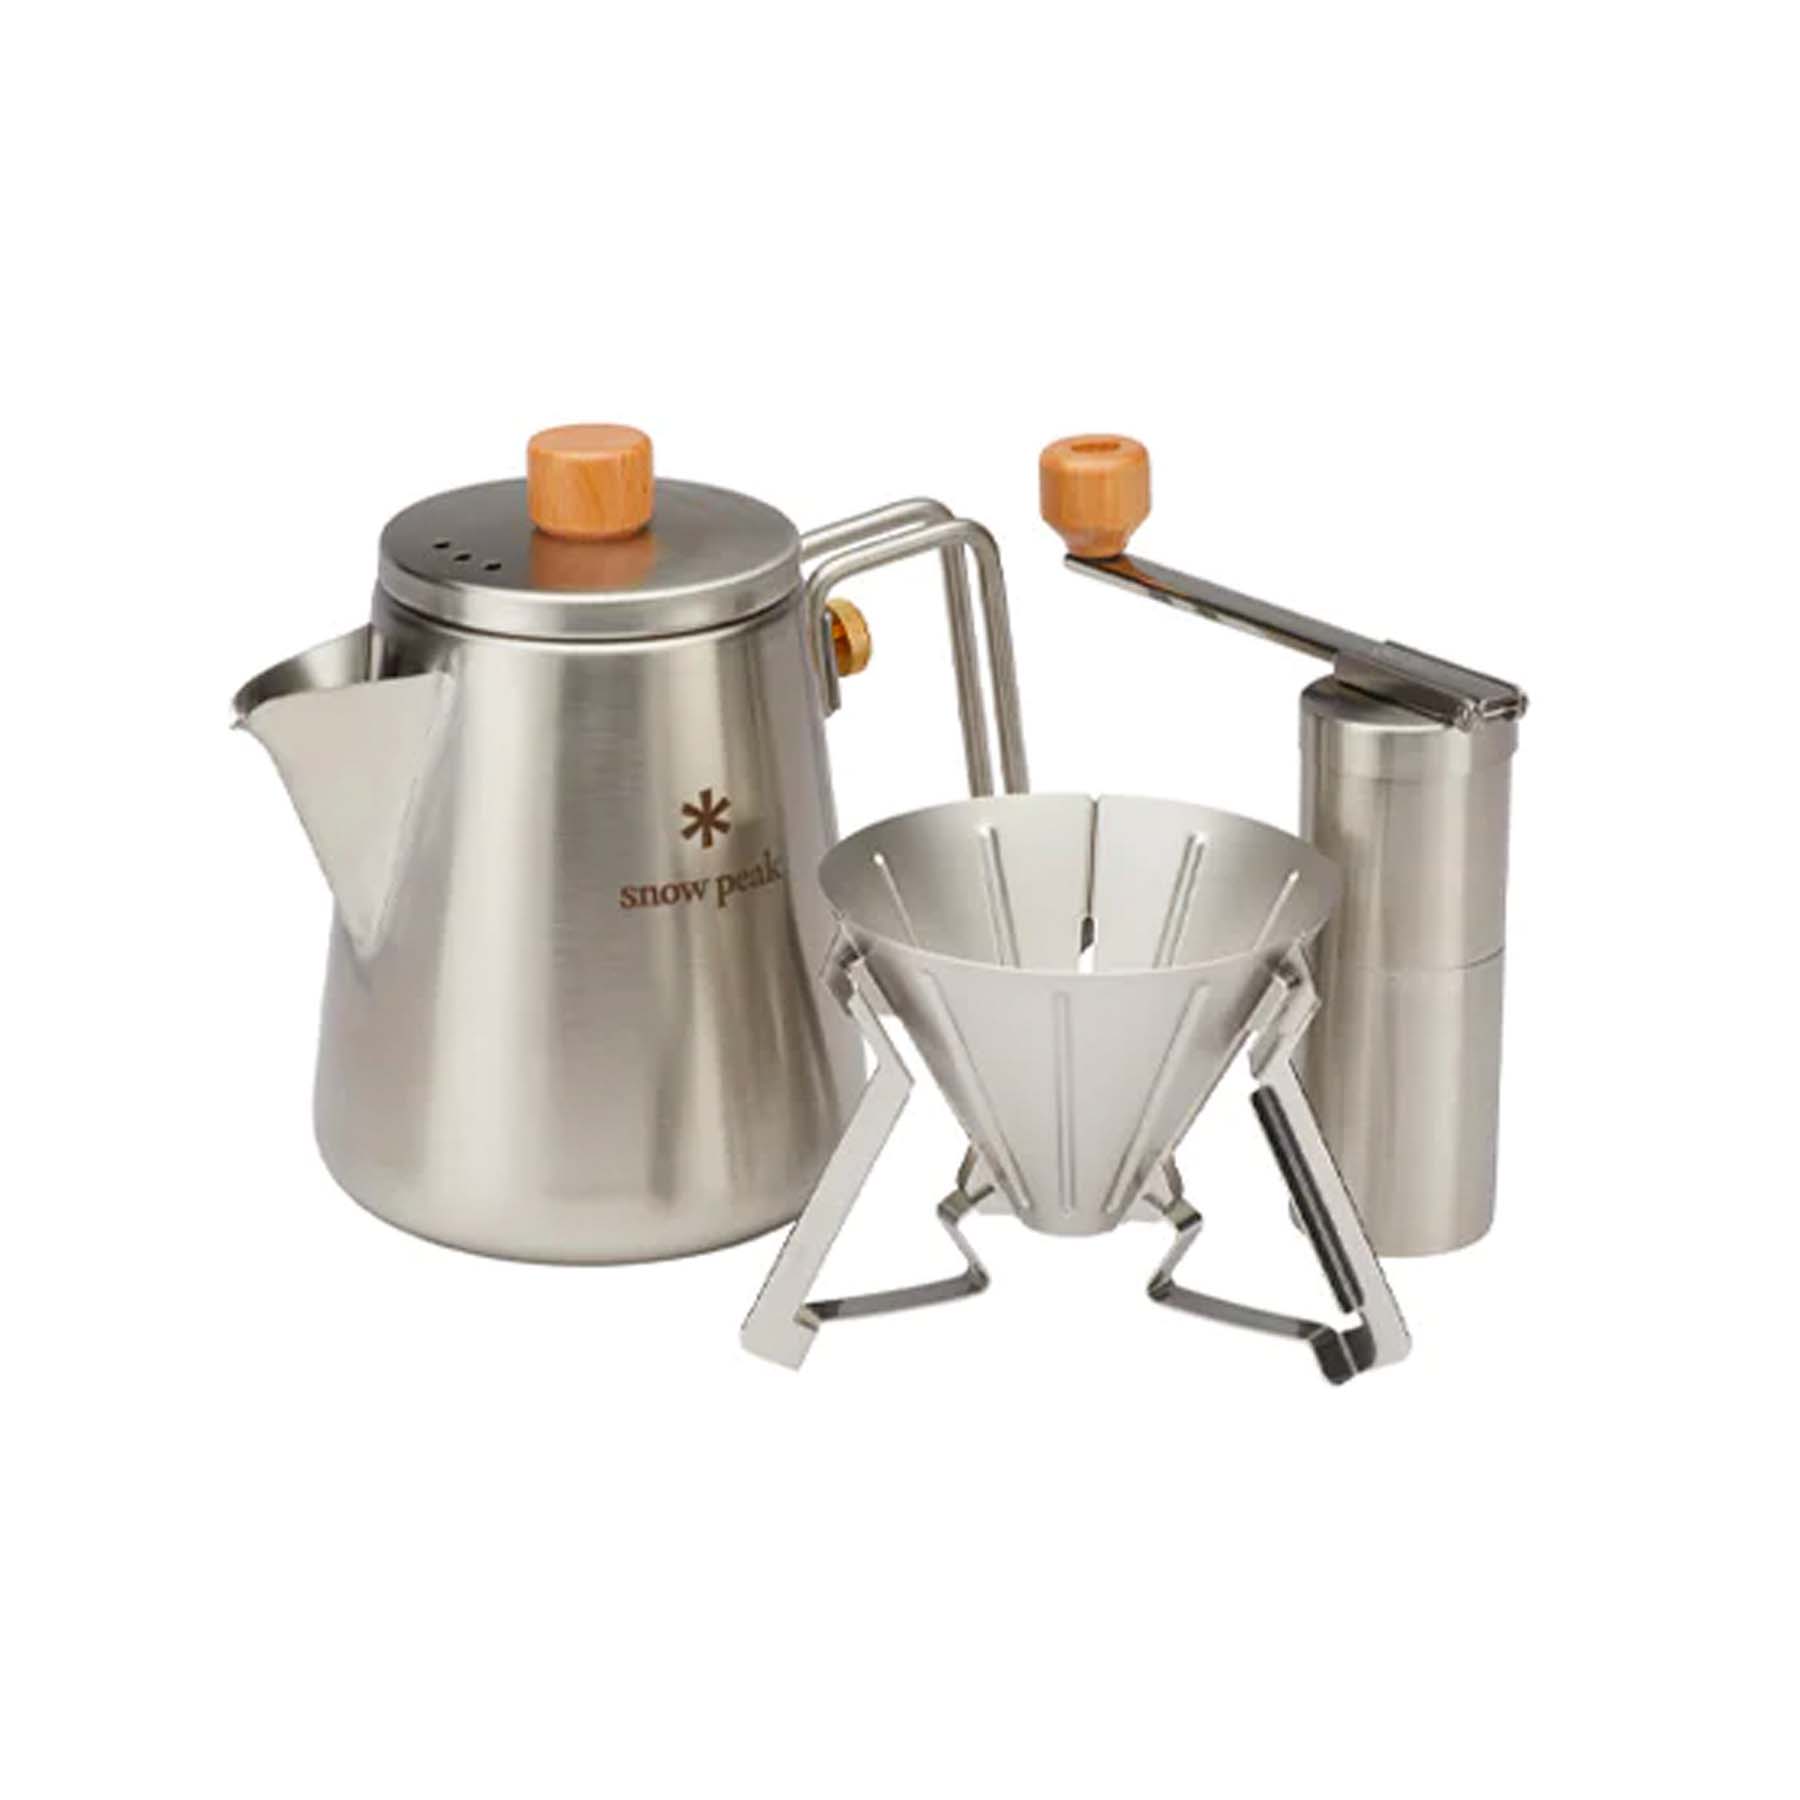 https://video-images.vice.com//products/6419e0aca47f9747b4928d2a/gallery-image/1679417516520-best-things-to-buy-at-snow-peak-field-barista-set.jpeg?crop=0.8xw:1xh;center,center